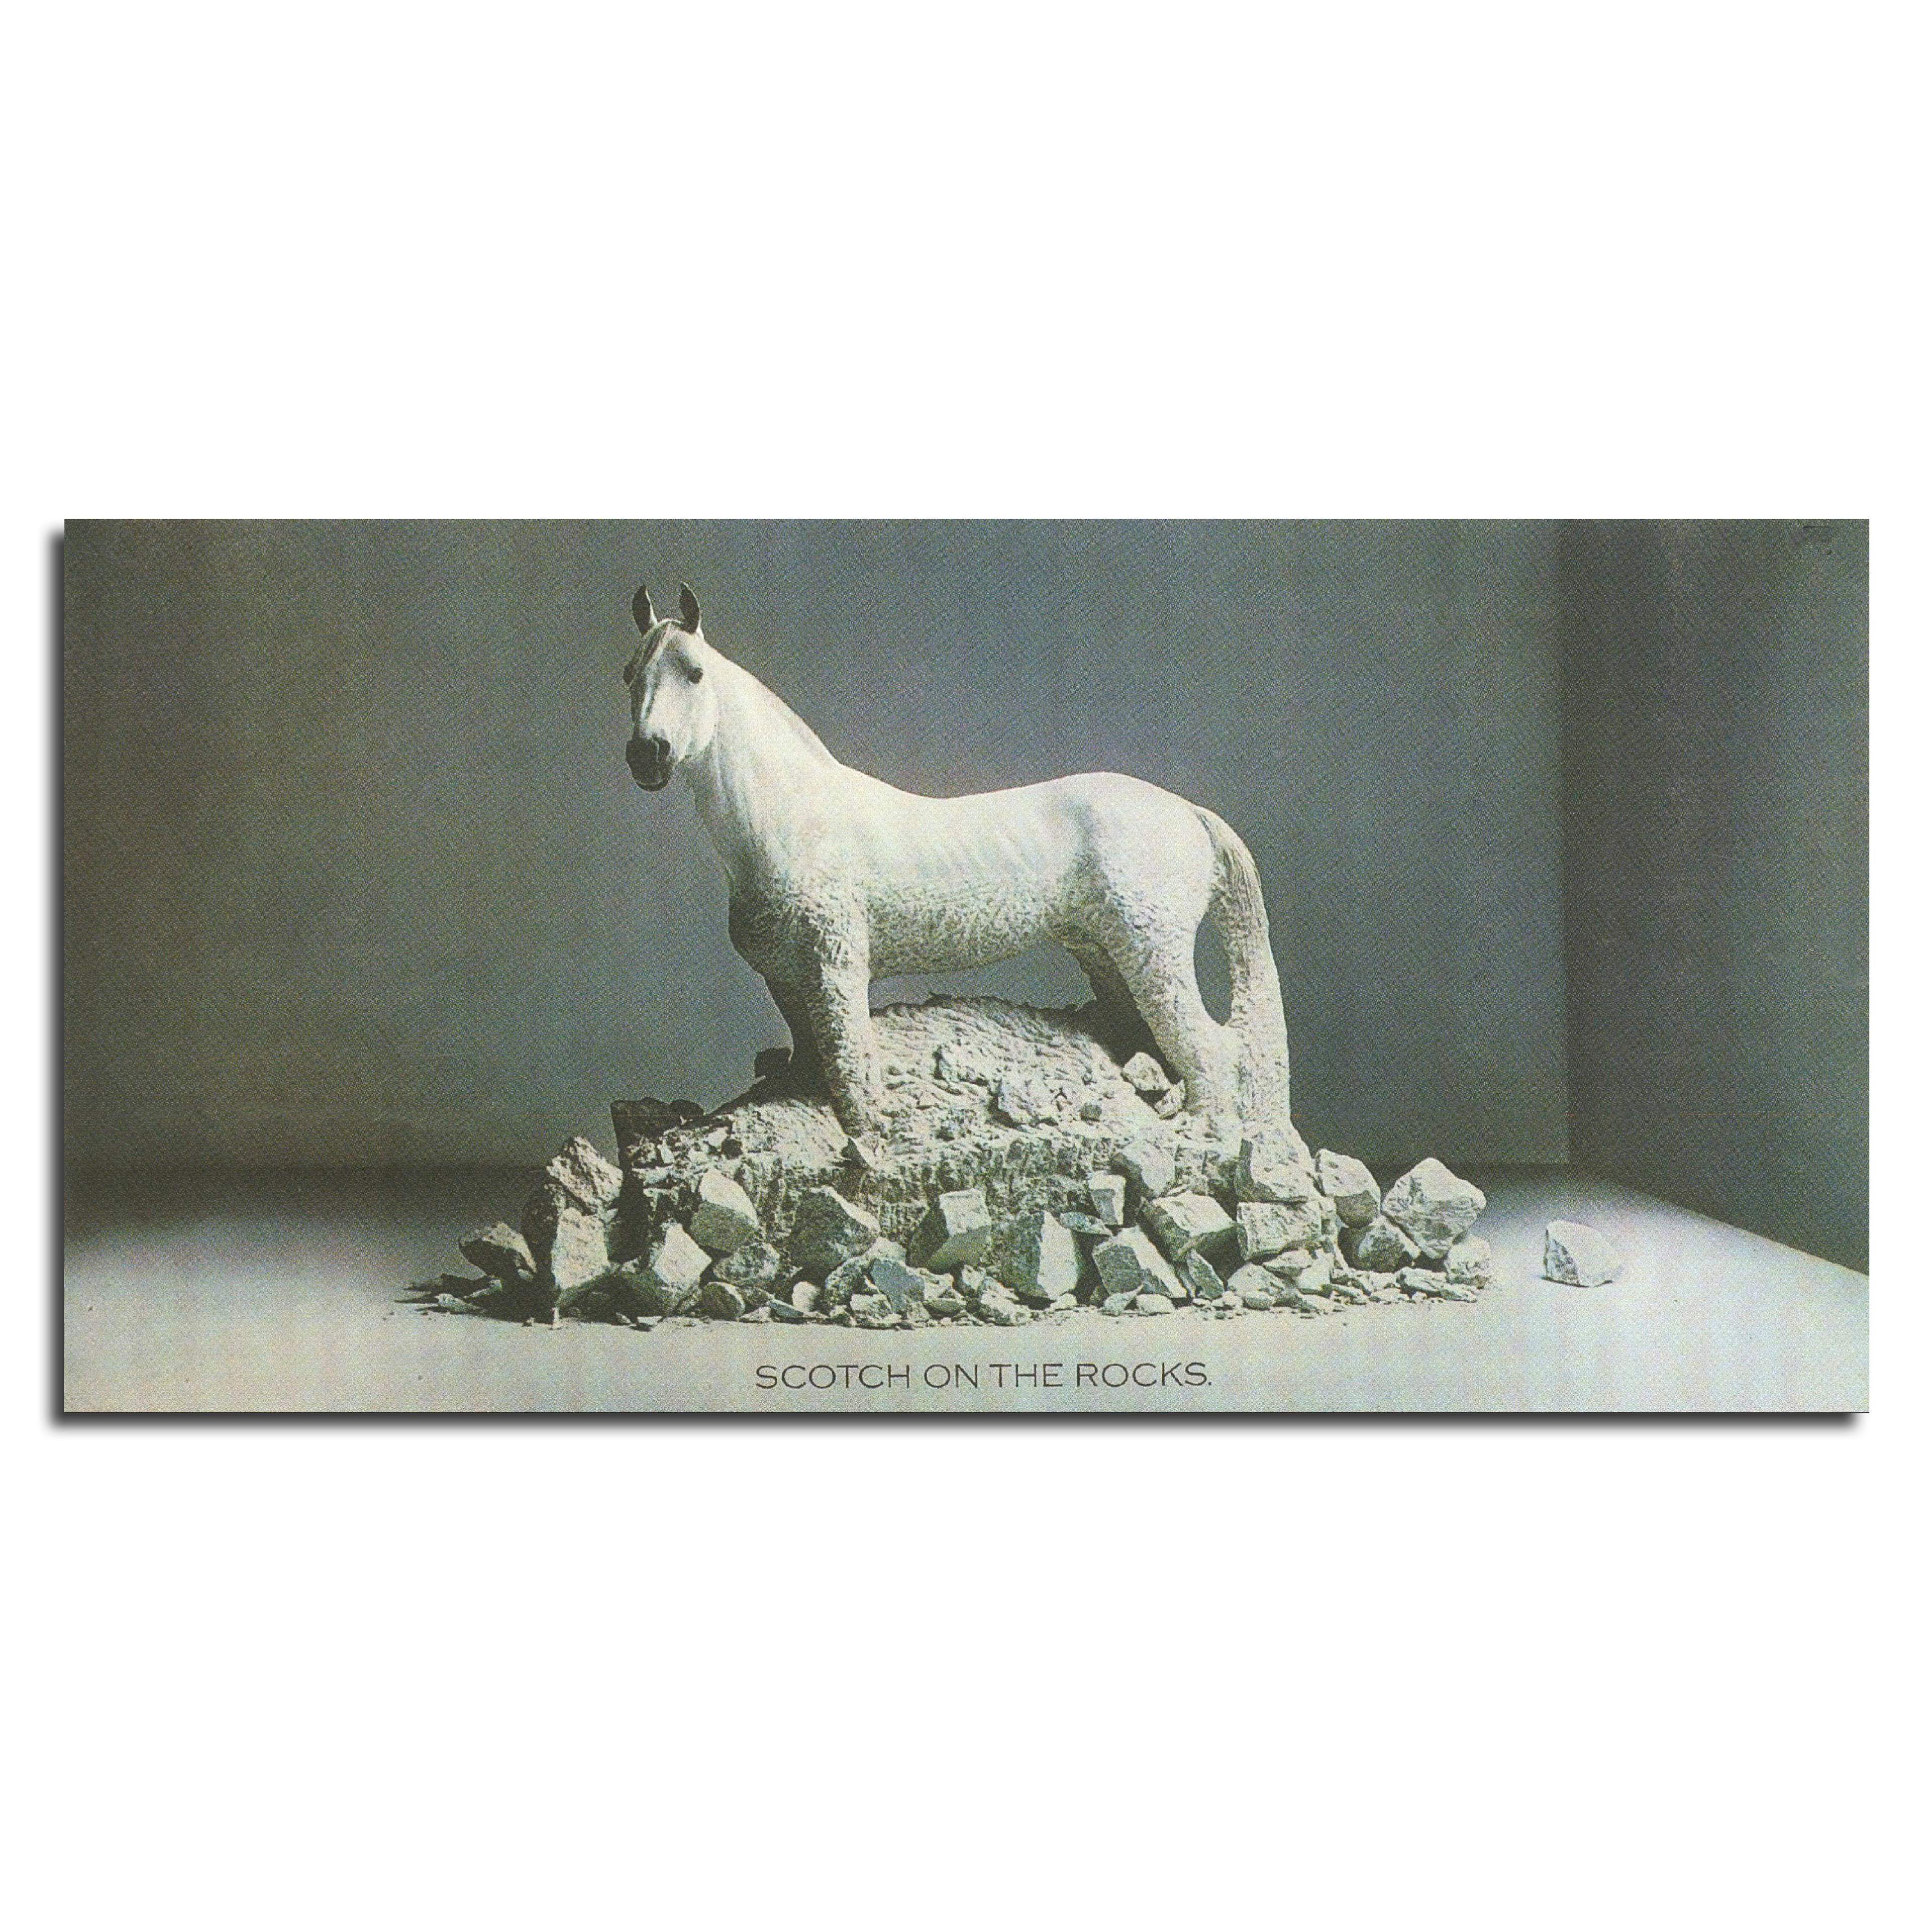 Photograph of a large white horse standing amongst a pile of white rocks. Award-winning White Horse Whisky poster.